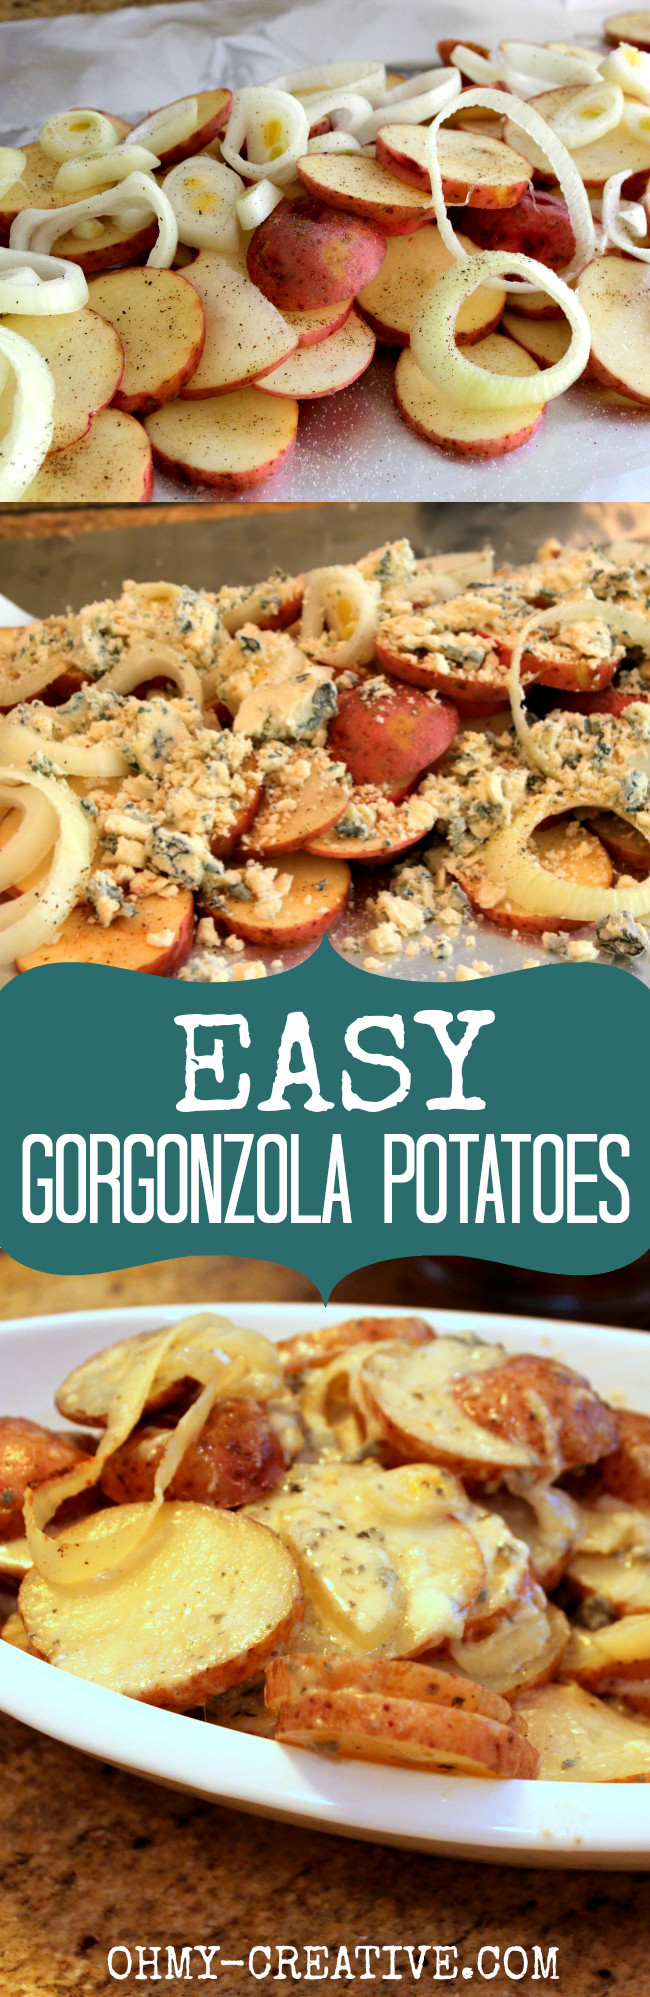 This Easy Gorgonzola Potatoes is one of my favorite side dishes! Quick to prepare, wrap in foil and pop them in the oven. Gooey cheese goodness! | OHMY-CREATIVE.COM